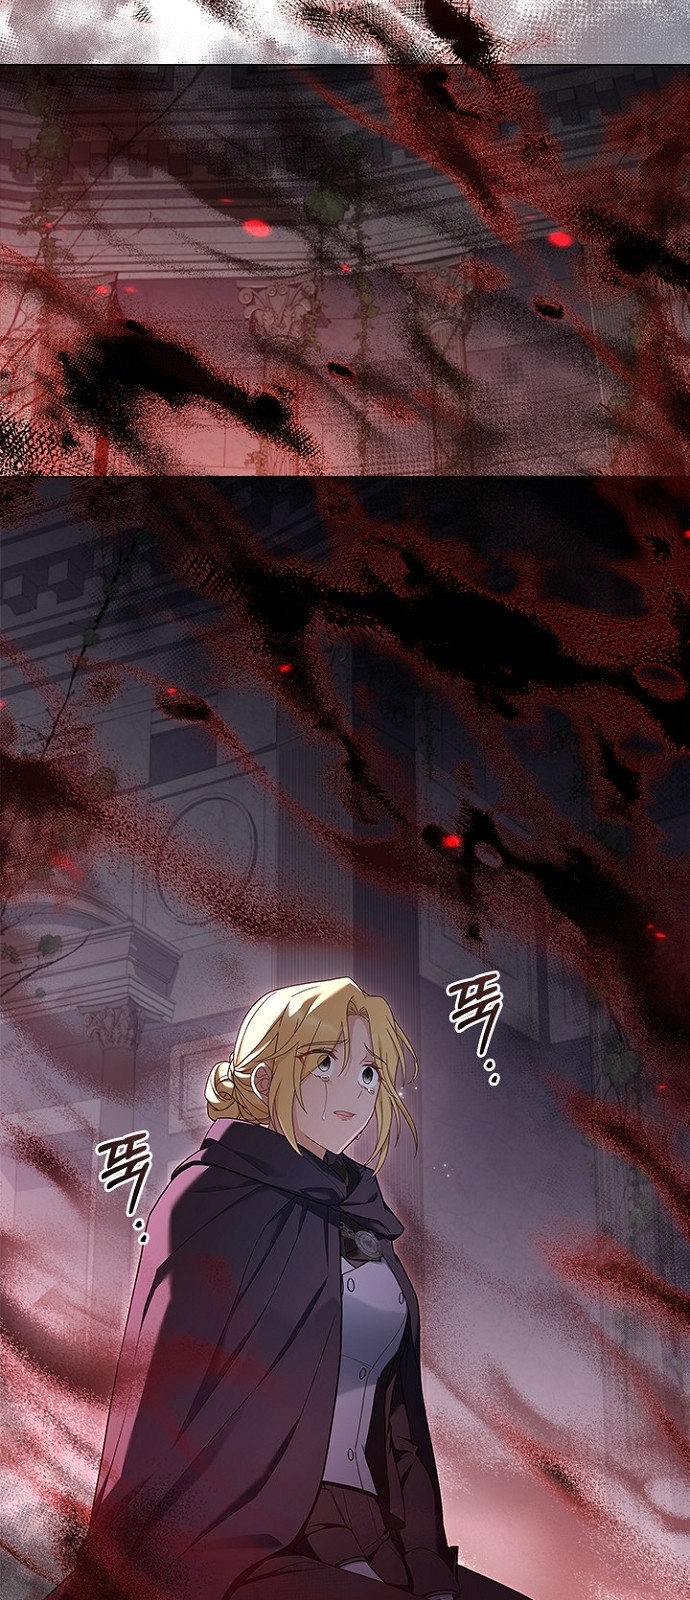 His Majesty's Proposal (A Night With the Emperor) - Chapter 93 - Page 66